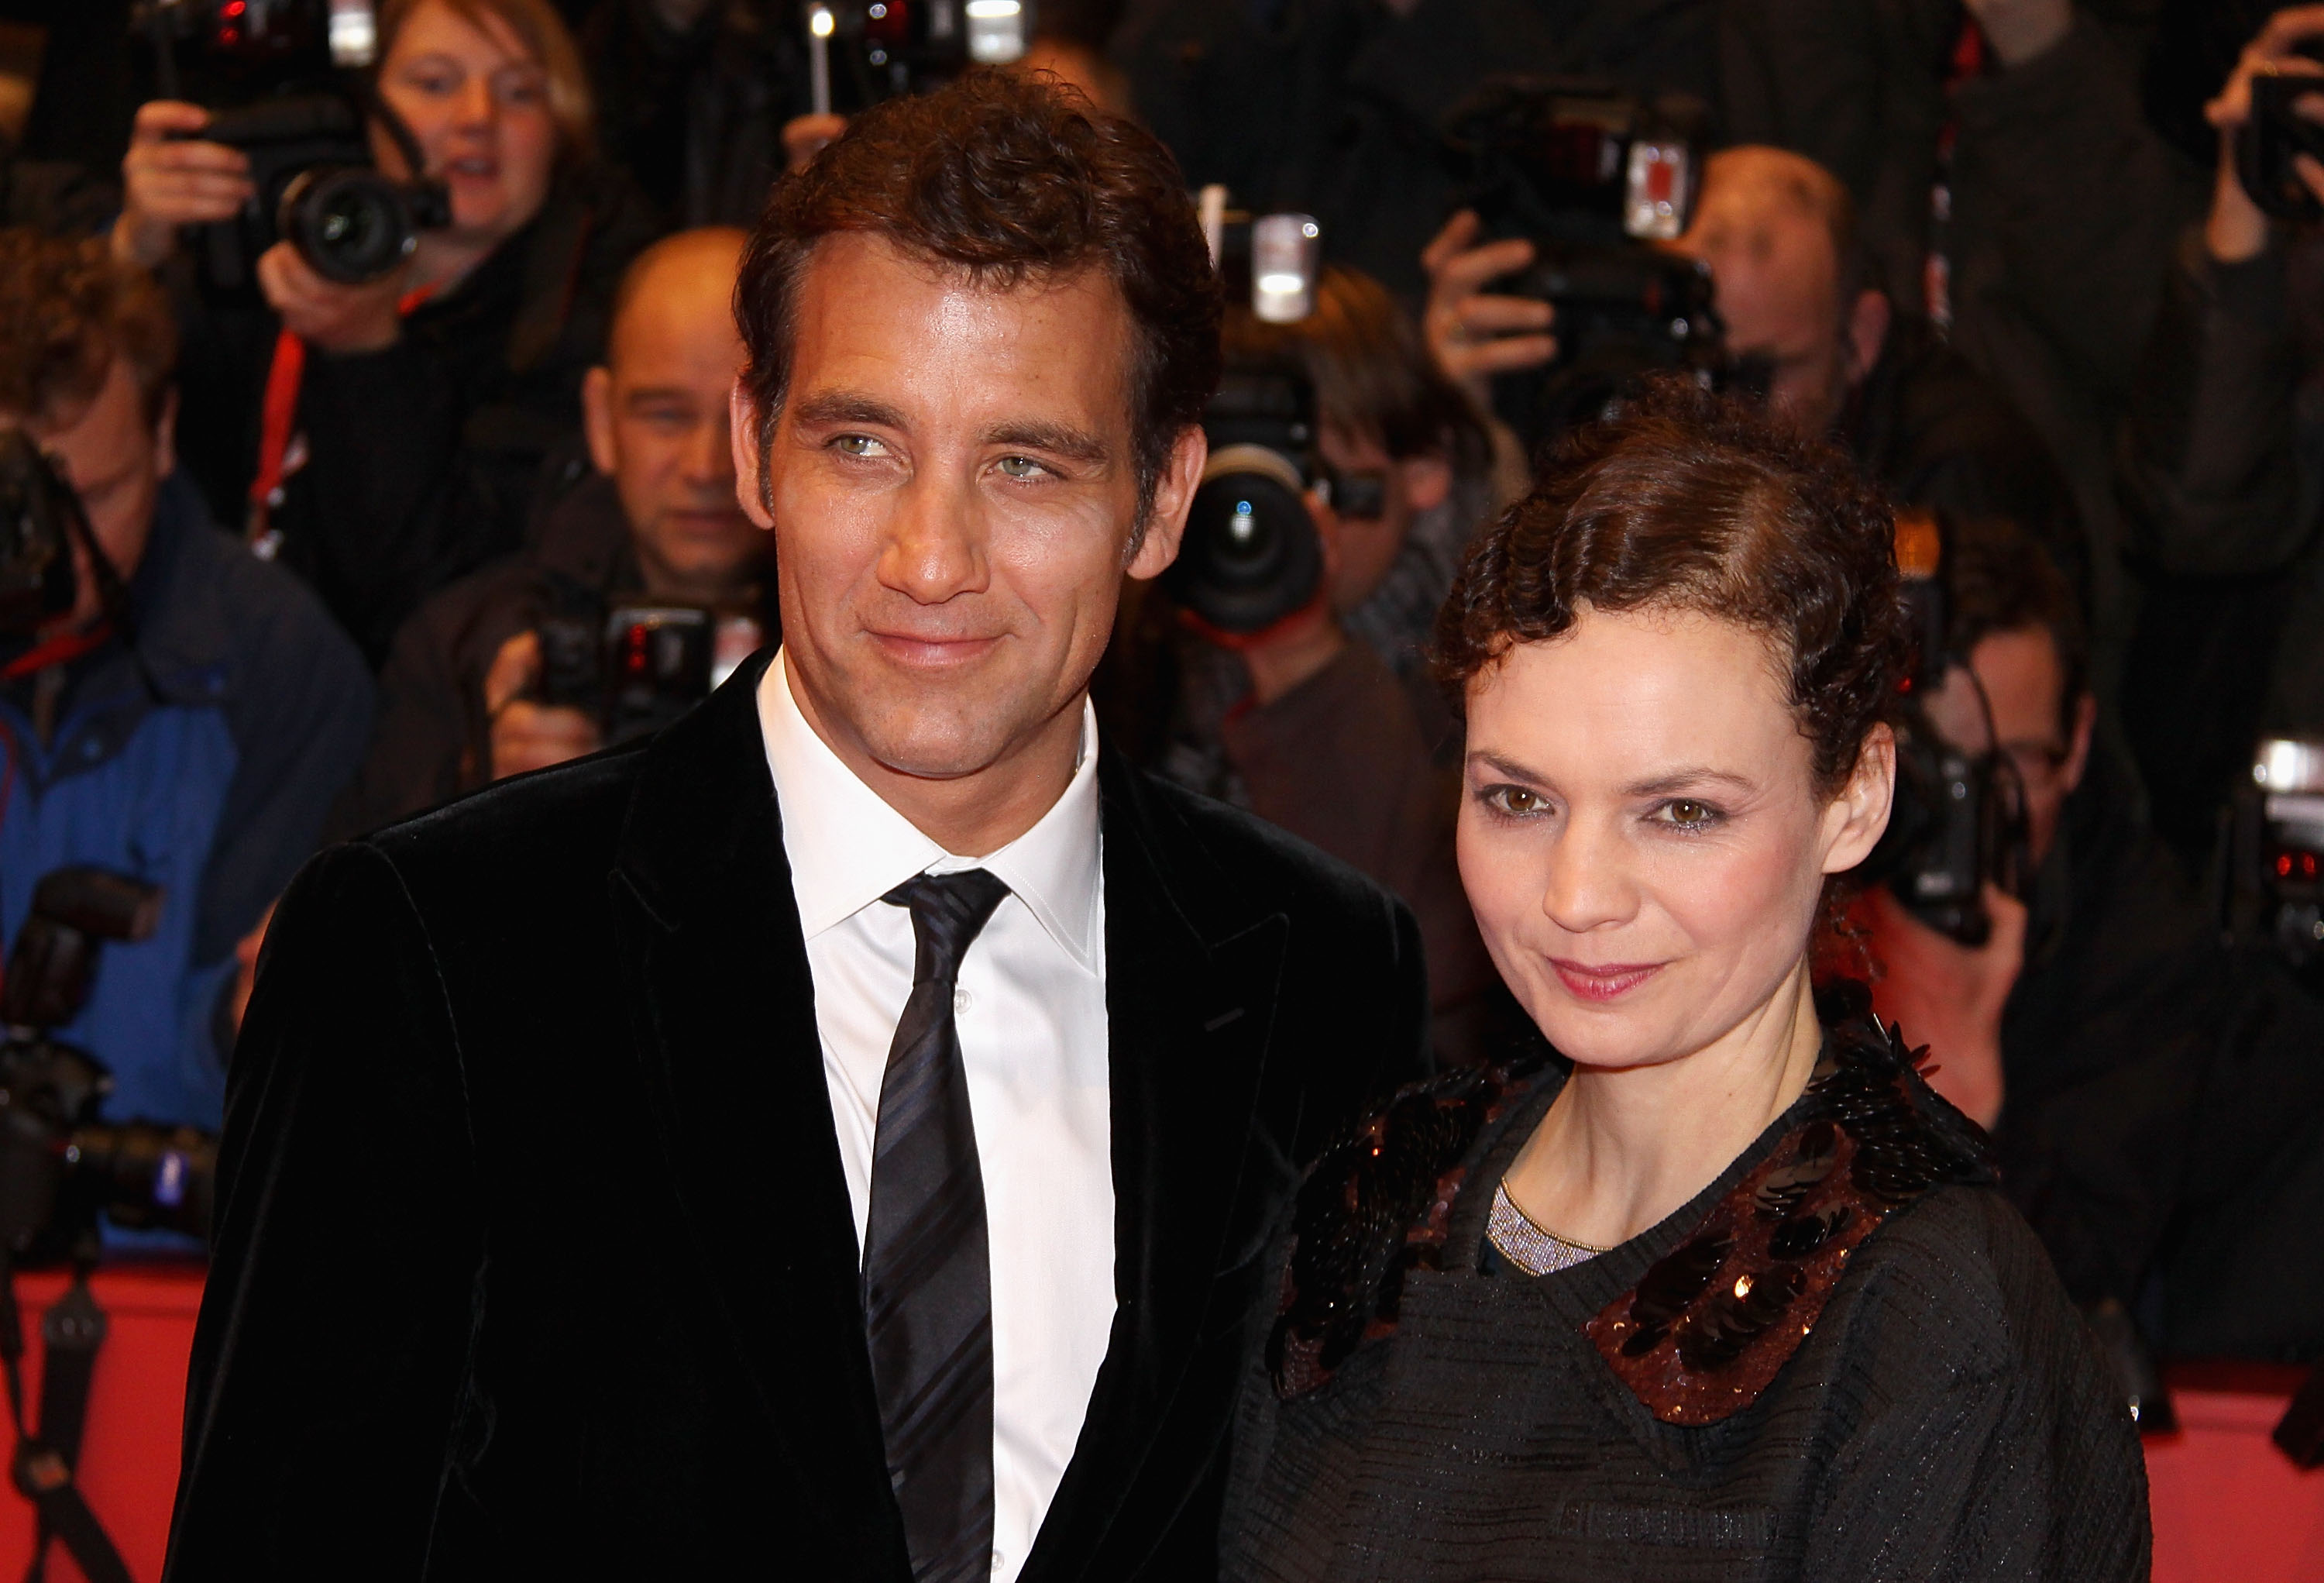 Clive Owen and Sarah-Jane Fenton attend the "The International" premiere and Opening Ceremony during the 59th Berlin International Film Festival at the Berlinale Palais on February 5, 2009, in Berlin, Germany | Source: Getty Images